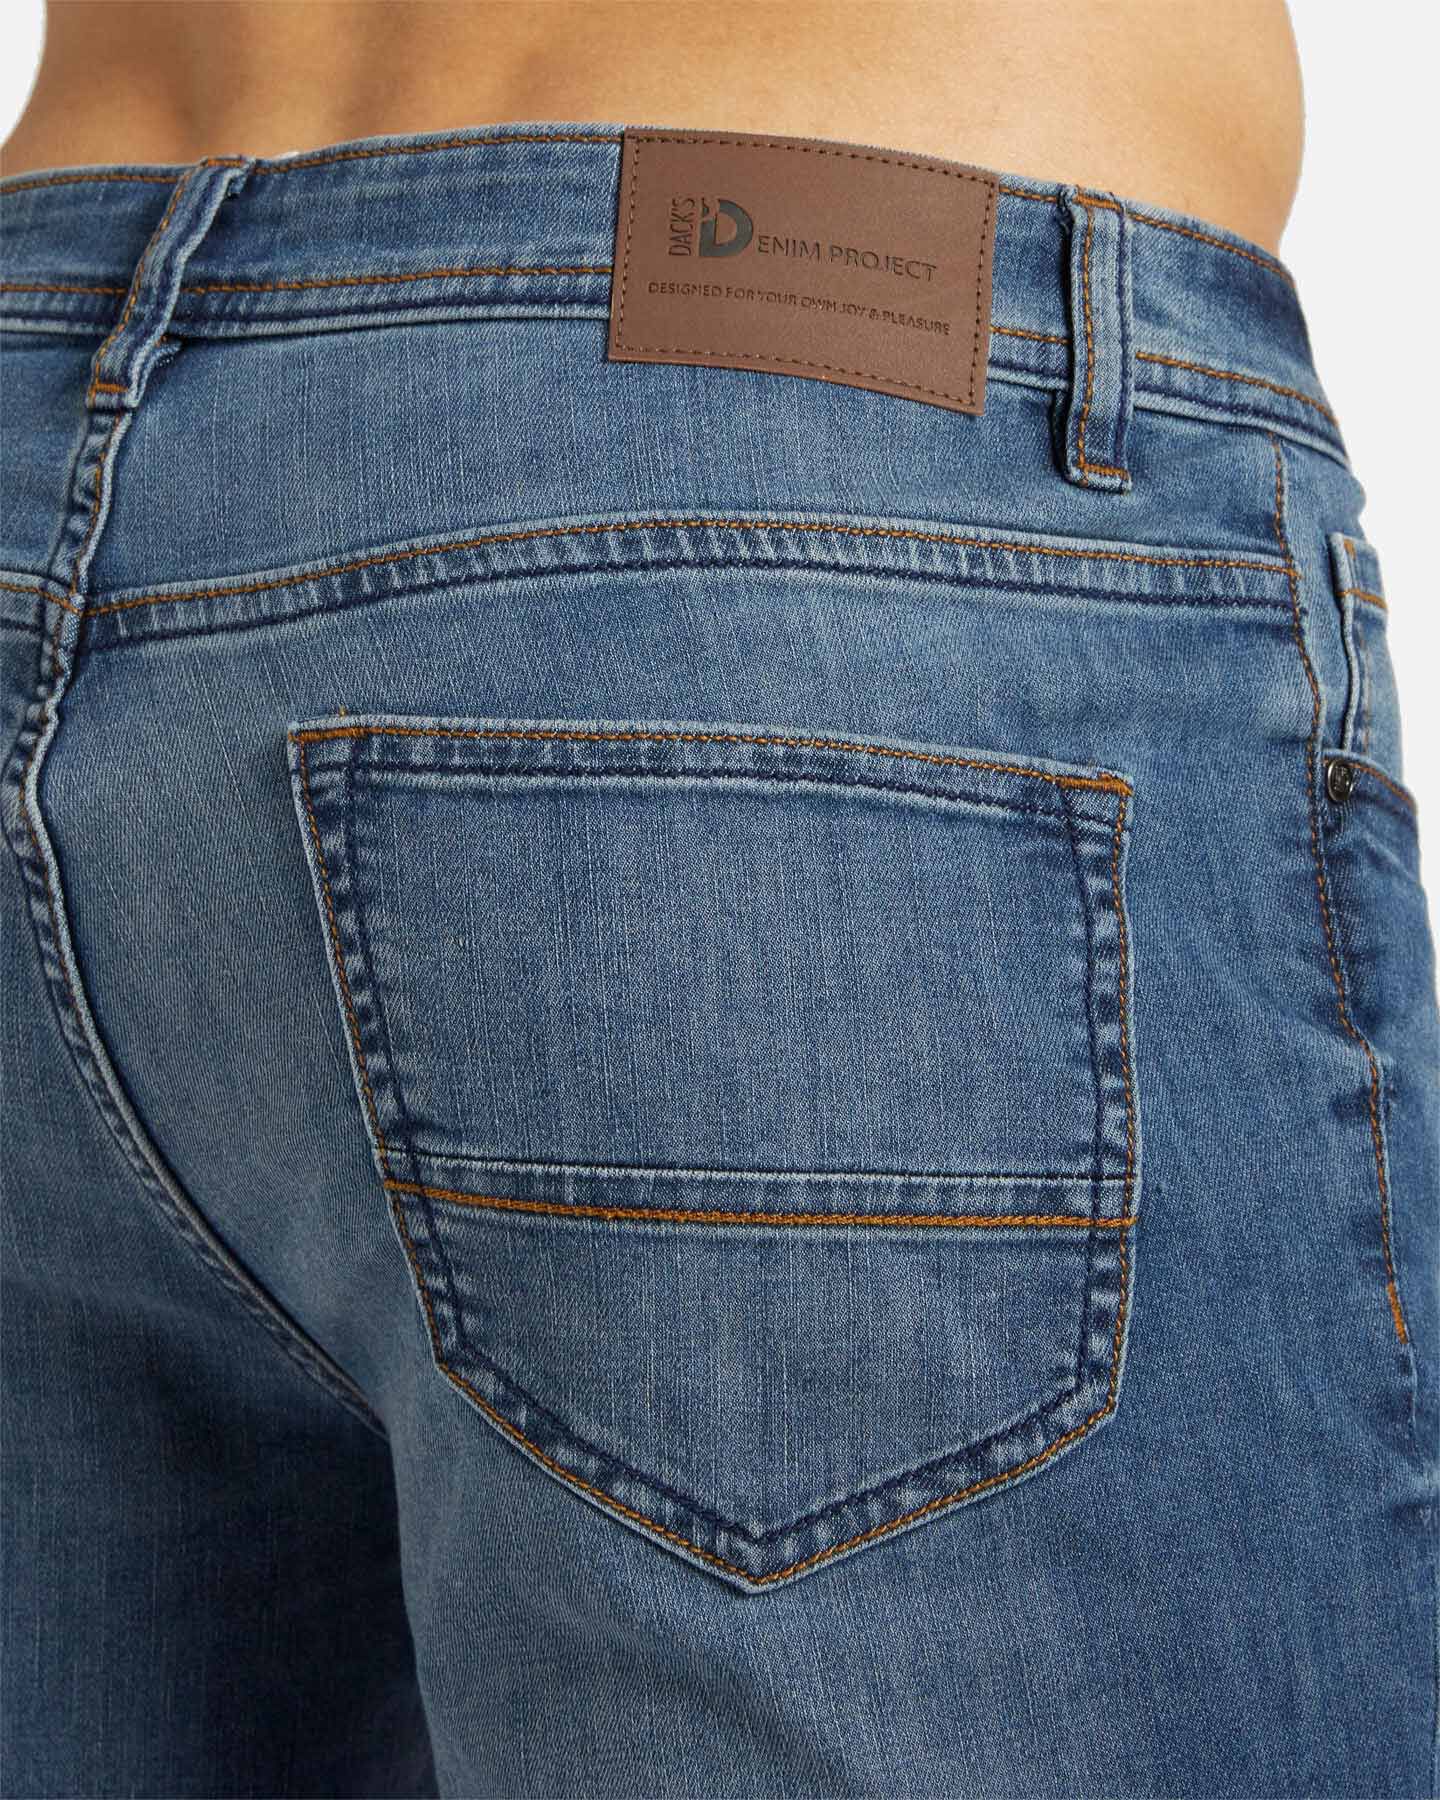  Jeans DACK'S ESSENTIAL M S4129651|MD|44 scatto 3